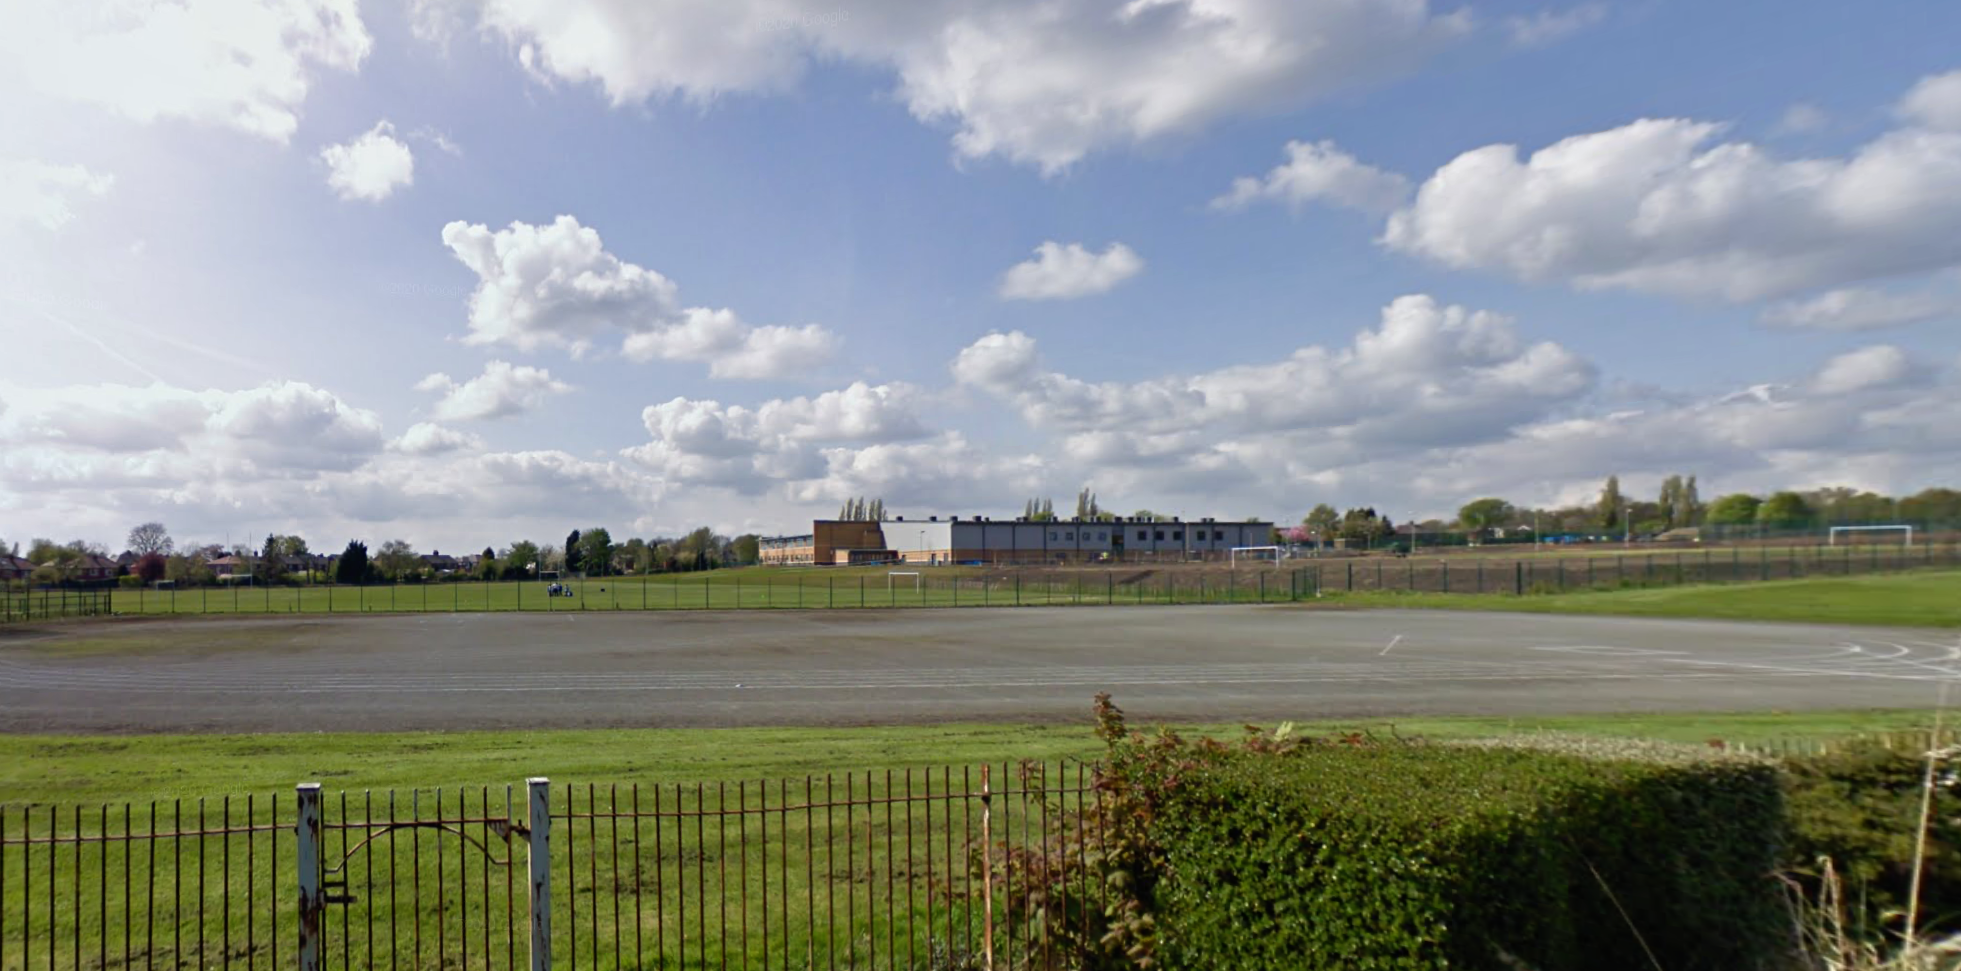 Plans to build 177 homes on Salford school made famous by hit TV show resubmitted